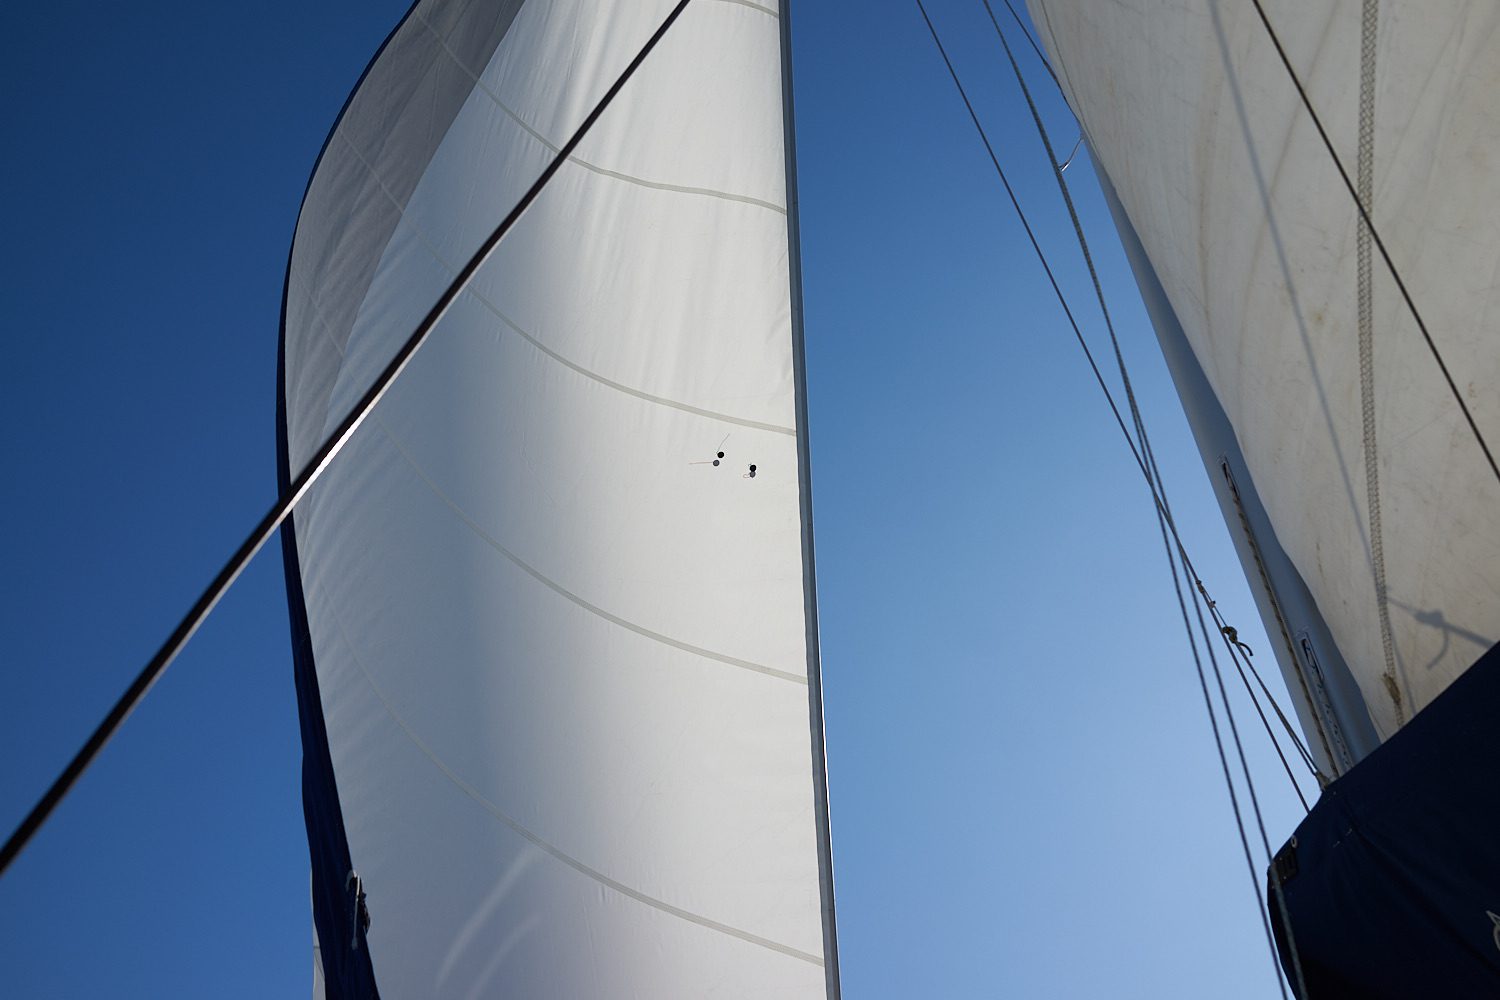 A sail is shown against the blue sky.